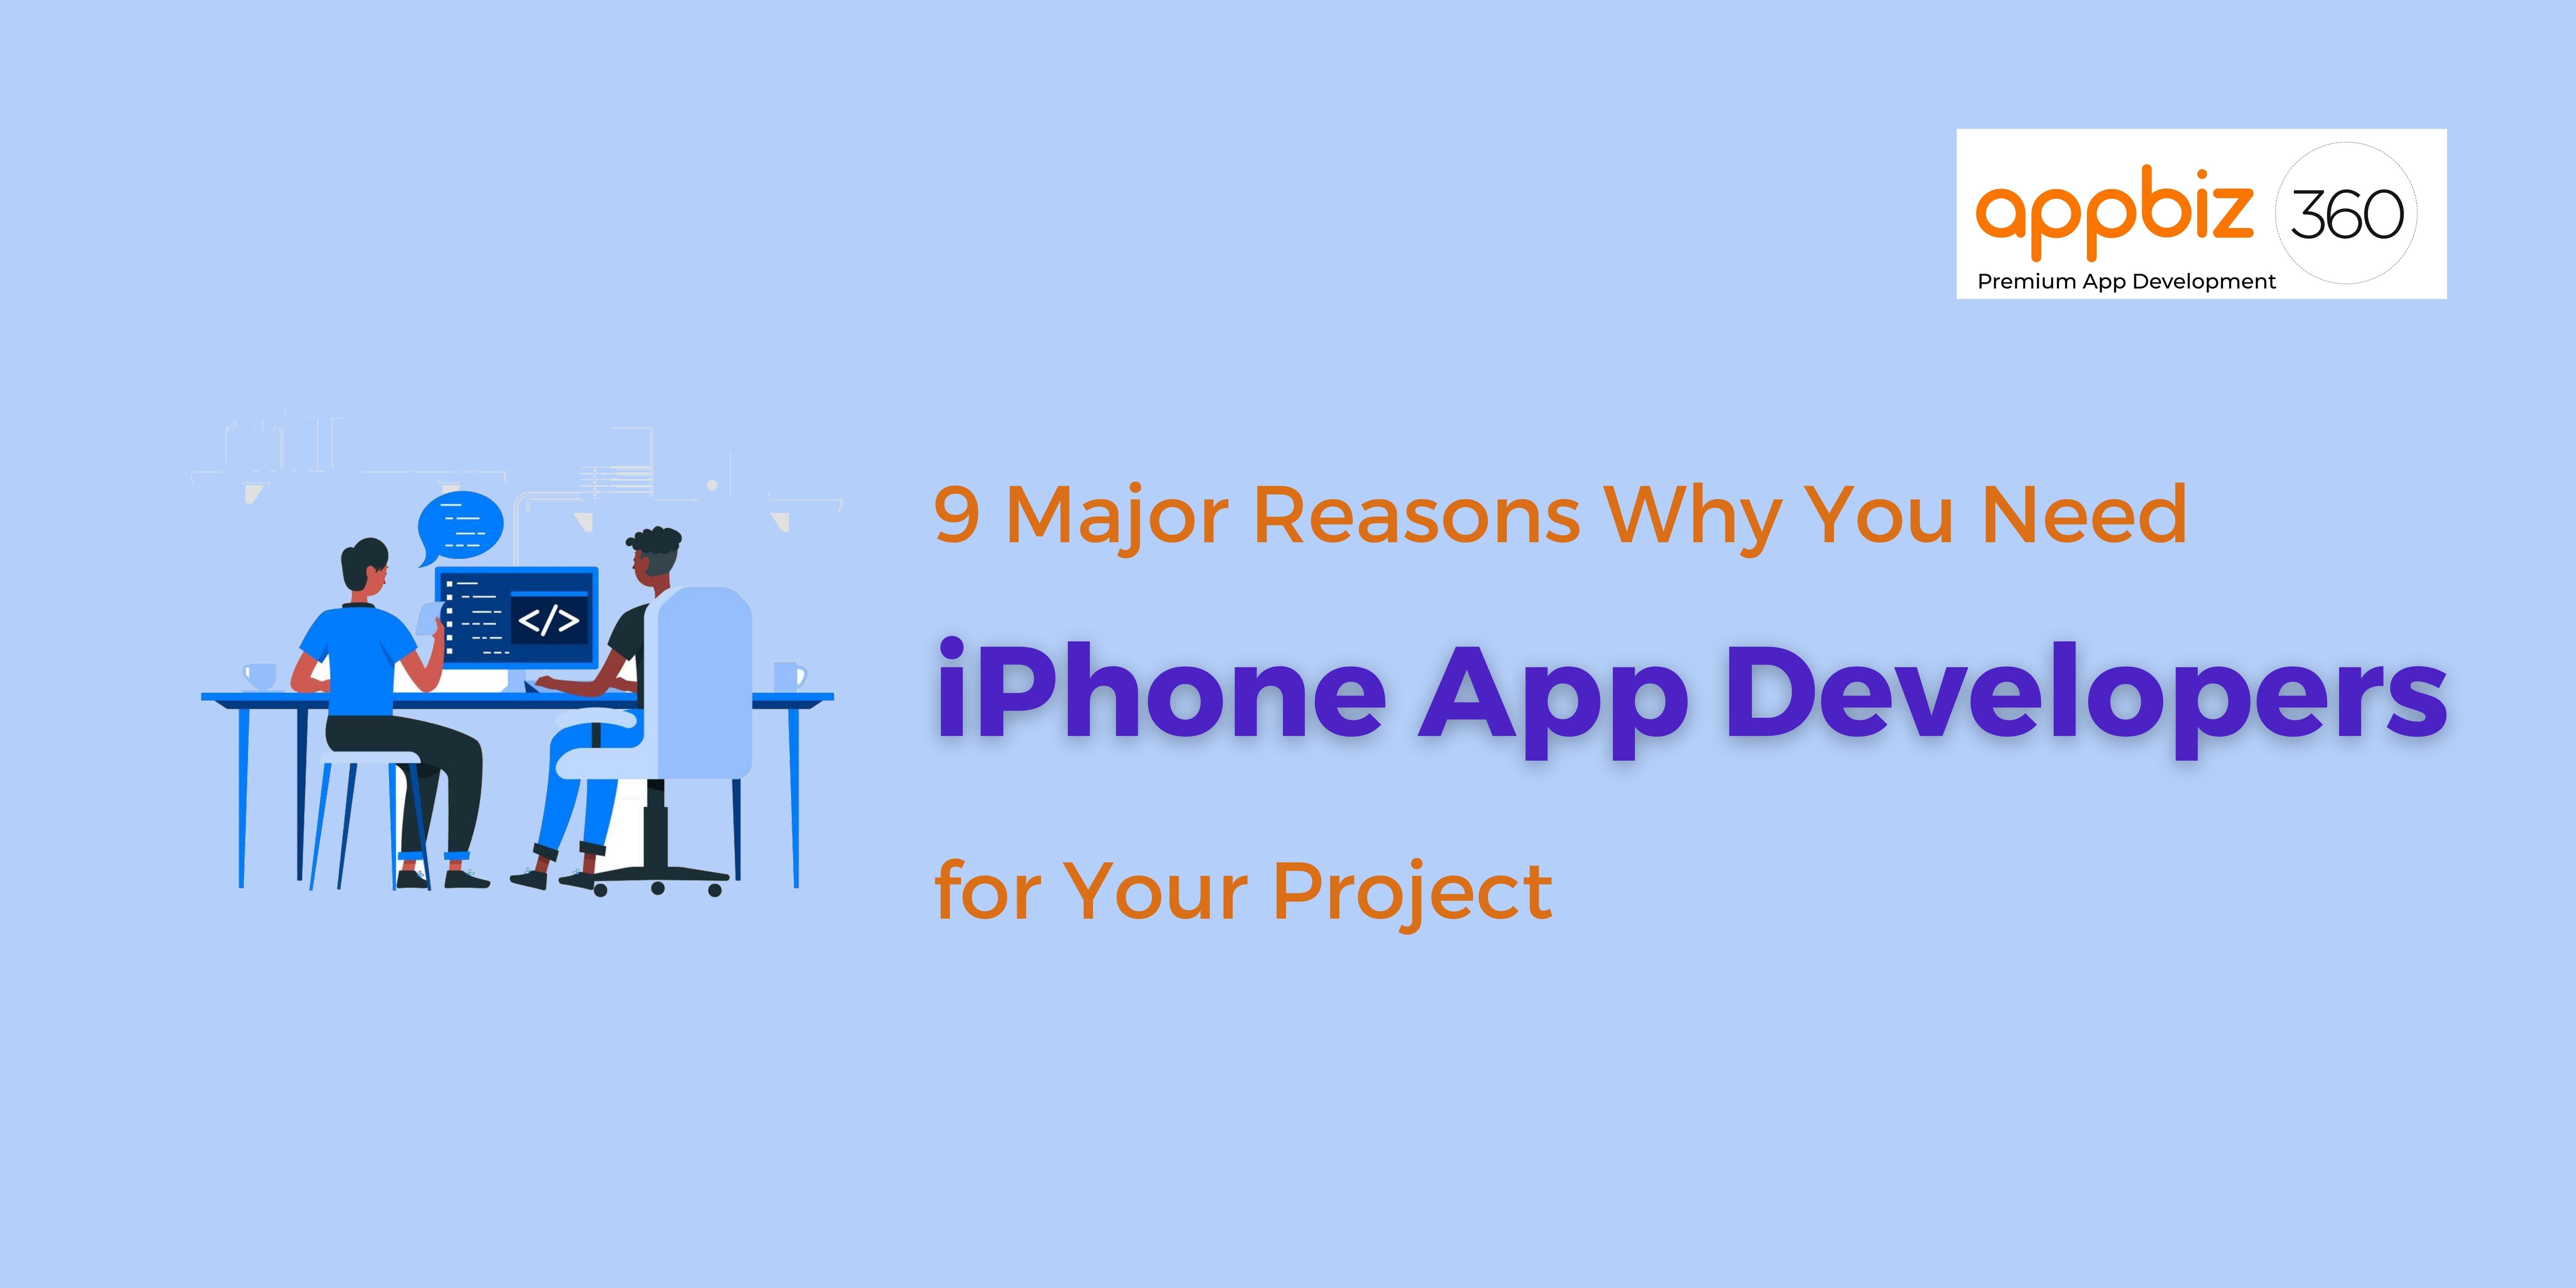 9 Major Reasons Why You Need iPhone App Developers for Your Project